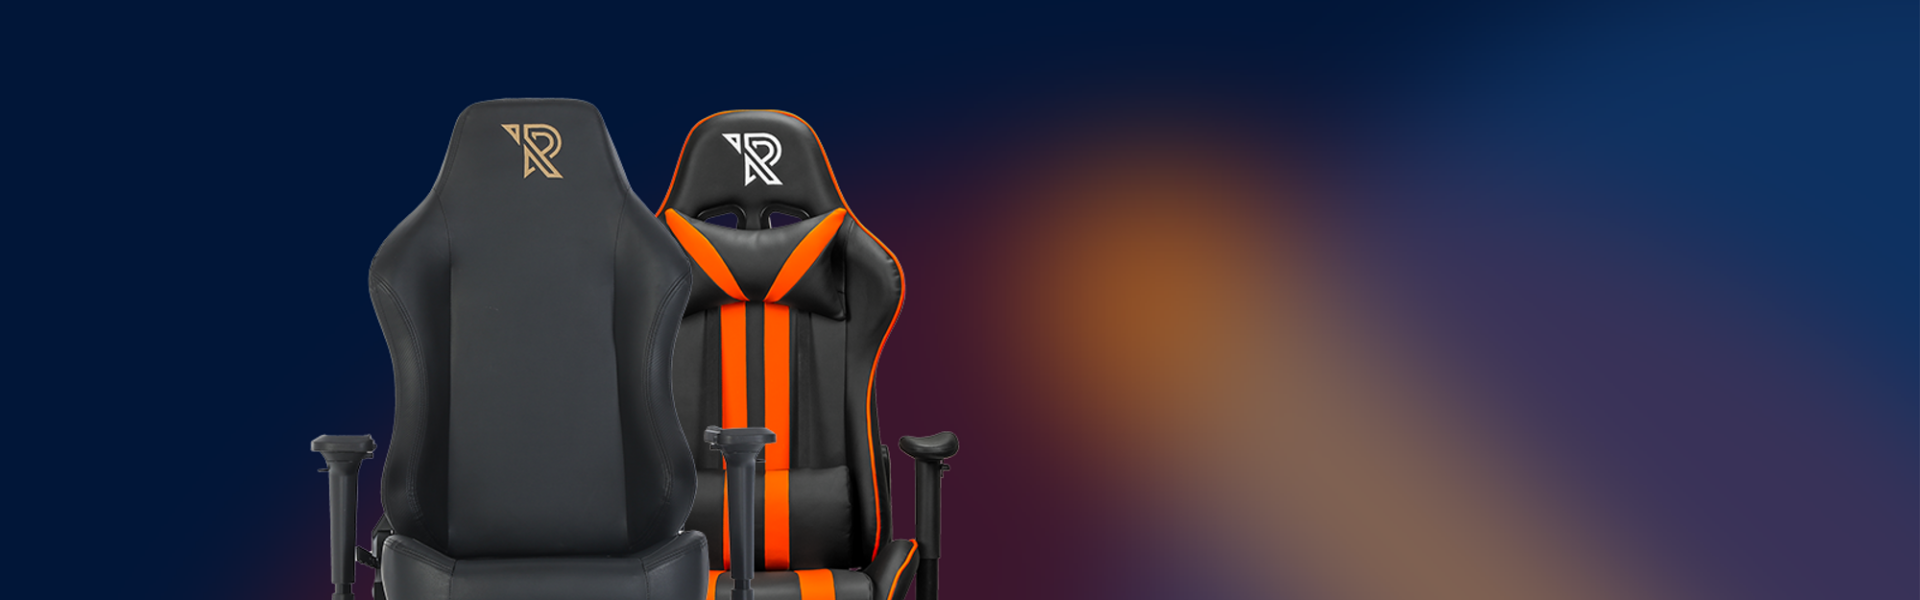 Blog - Gaming chair for tall and heavier people